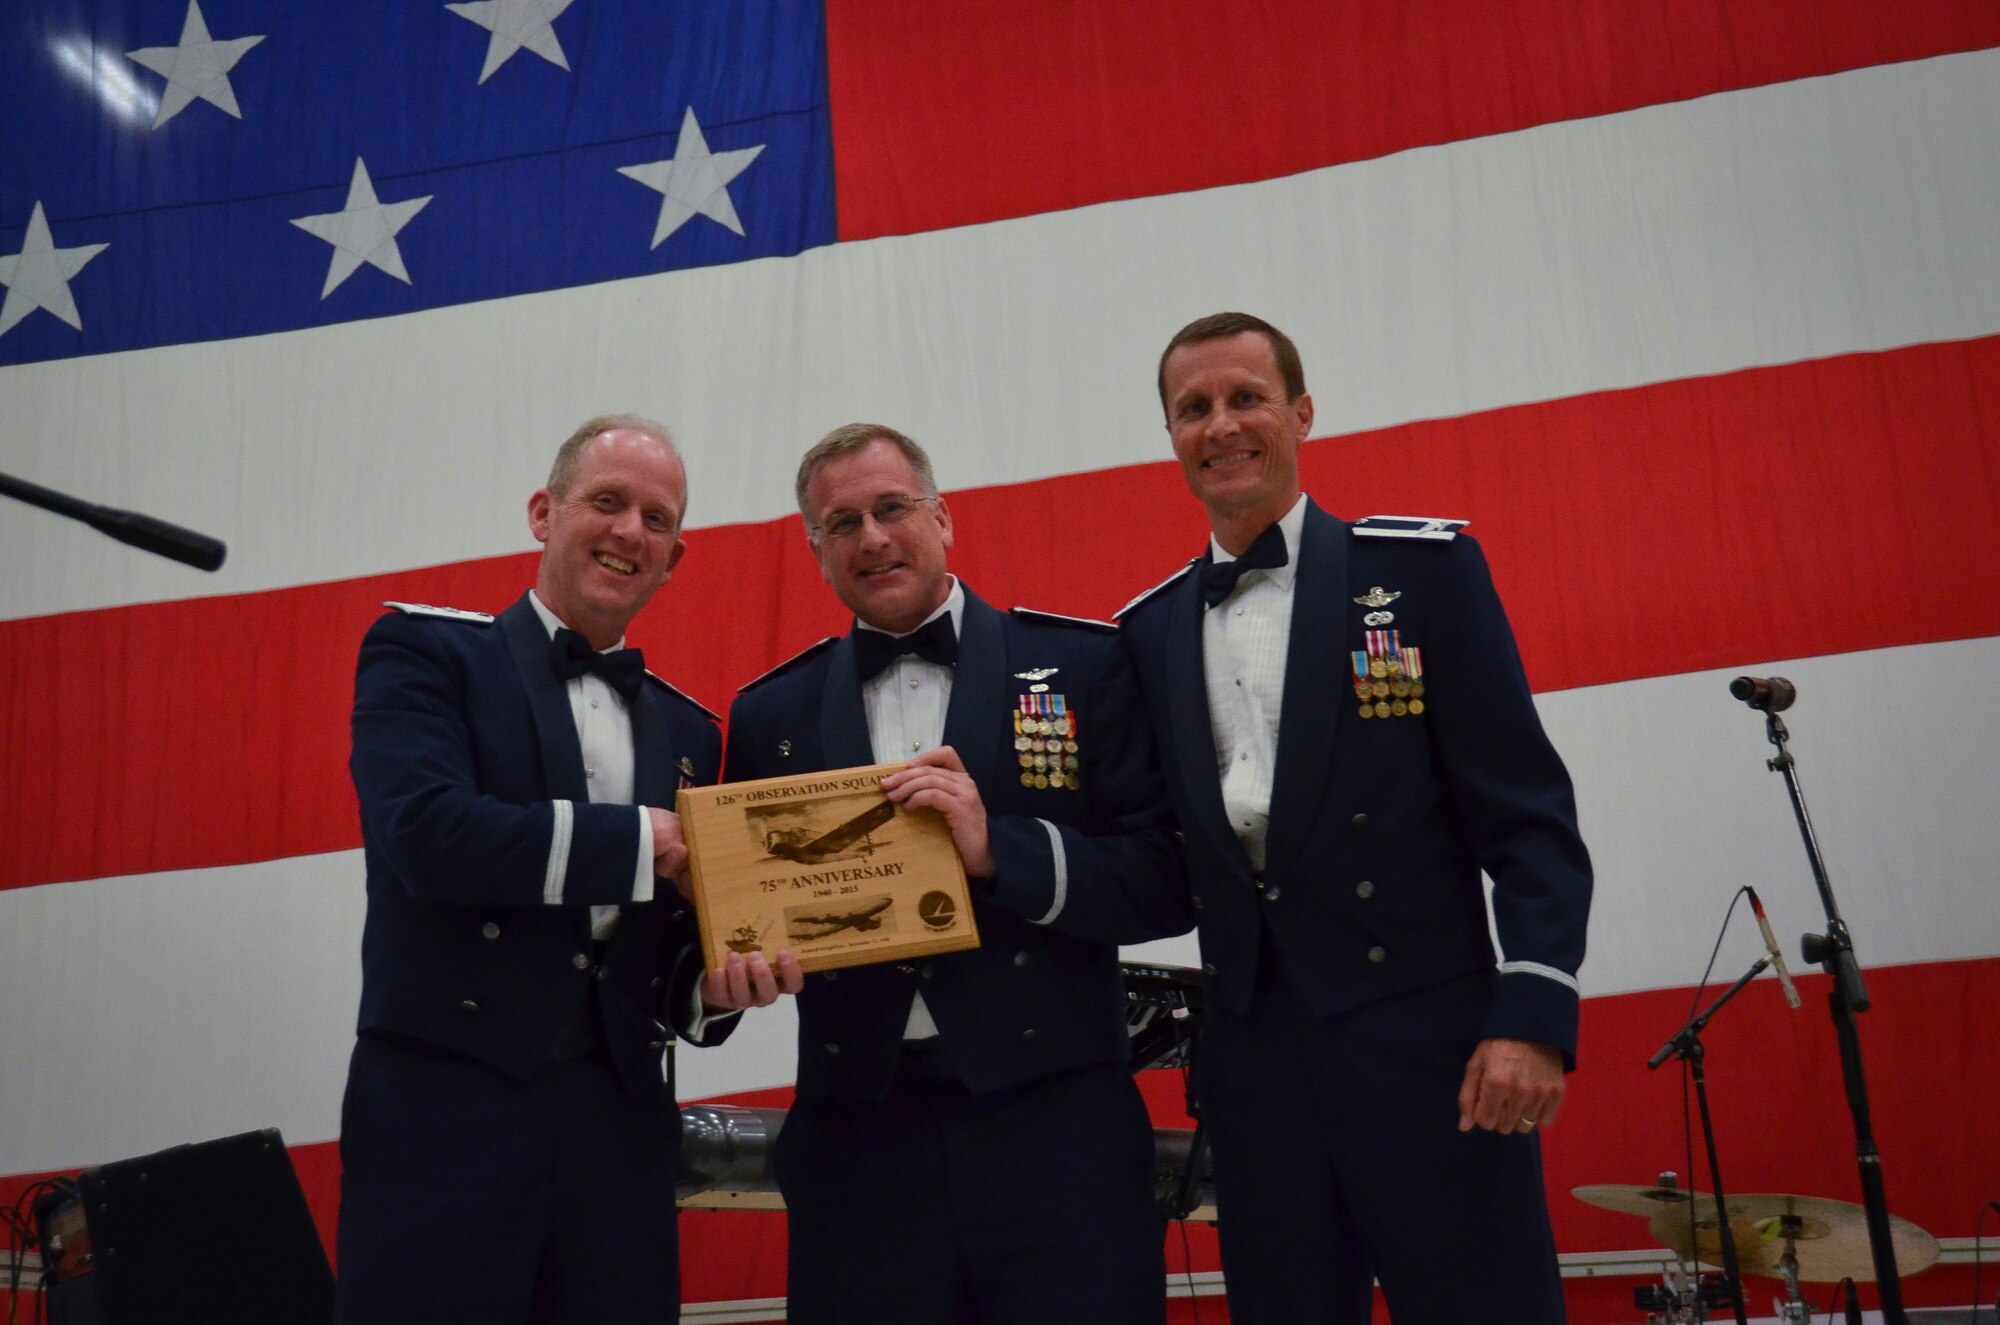 Maj. Gen. Donald Dunbar, the Adjutant General of Wisconsin, and Col. Chad Milne, the Wisconsin Air National Guard State Director of Operations, presented an honorary plaque to Col. Steven Hunter, the 126th Air Refueling Squadron commander, commemorating the 75th year anniversary of the aviation squadron at the 35th annual Civic Dinner Dance in the aircraft hangar here May 14, 2015.  The Civic Dinner Dance is an event coordinated by the Milwaukee Armed Forces Committee for Wisconsin military members, elected state and local officials, and citizens of the local Milwaukee area to celebrate community relations during Armed Forces Week.  (U.S. Air National Guard photo by Tech. Sgt. Jenna Lenski/Released)